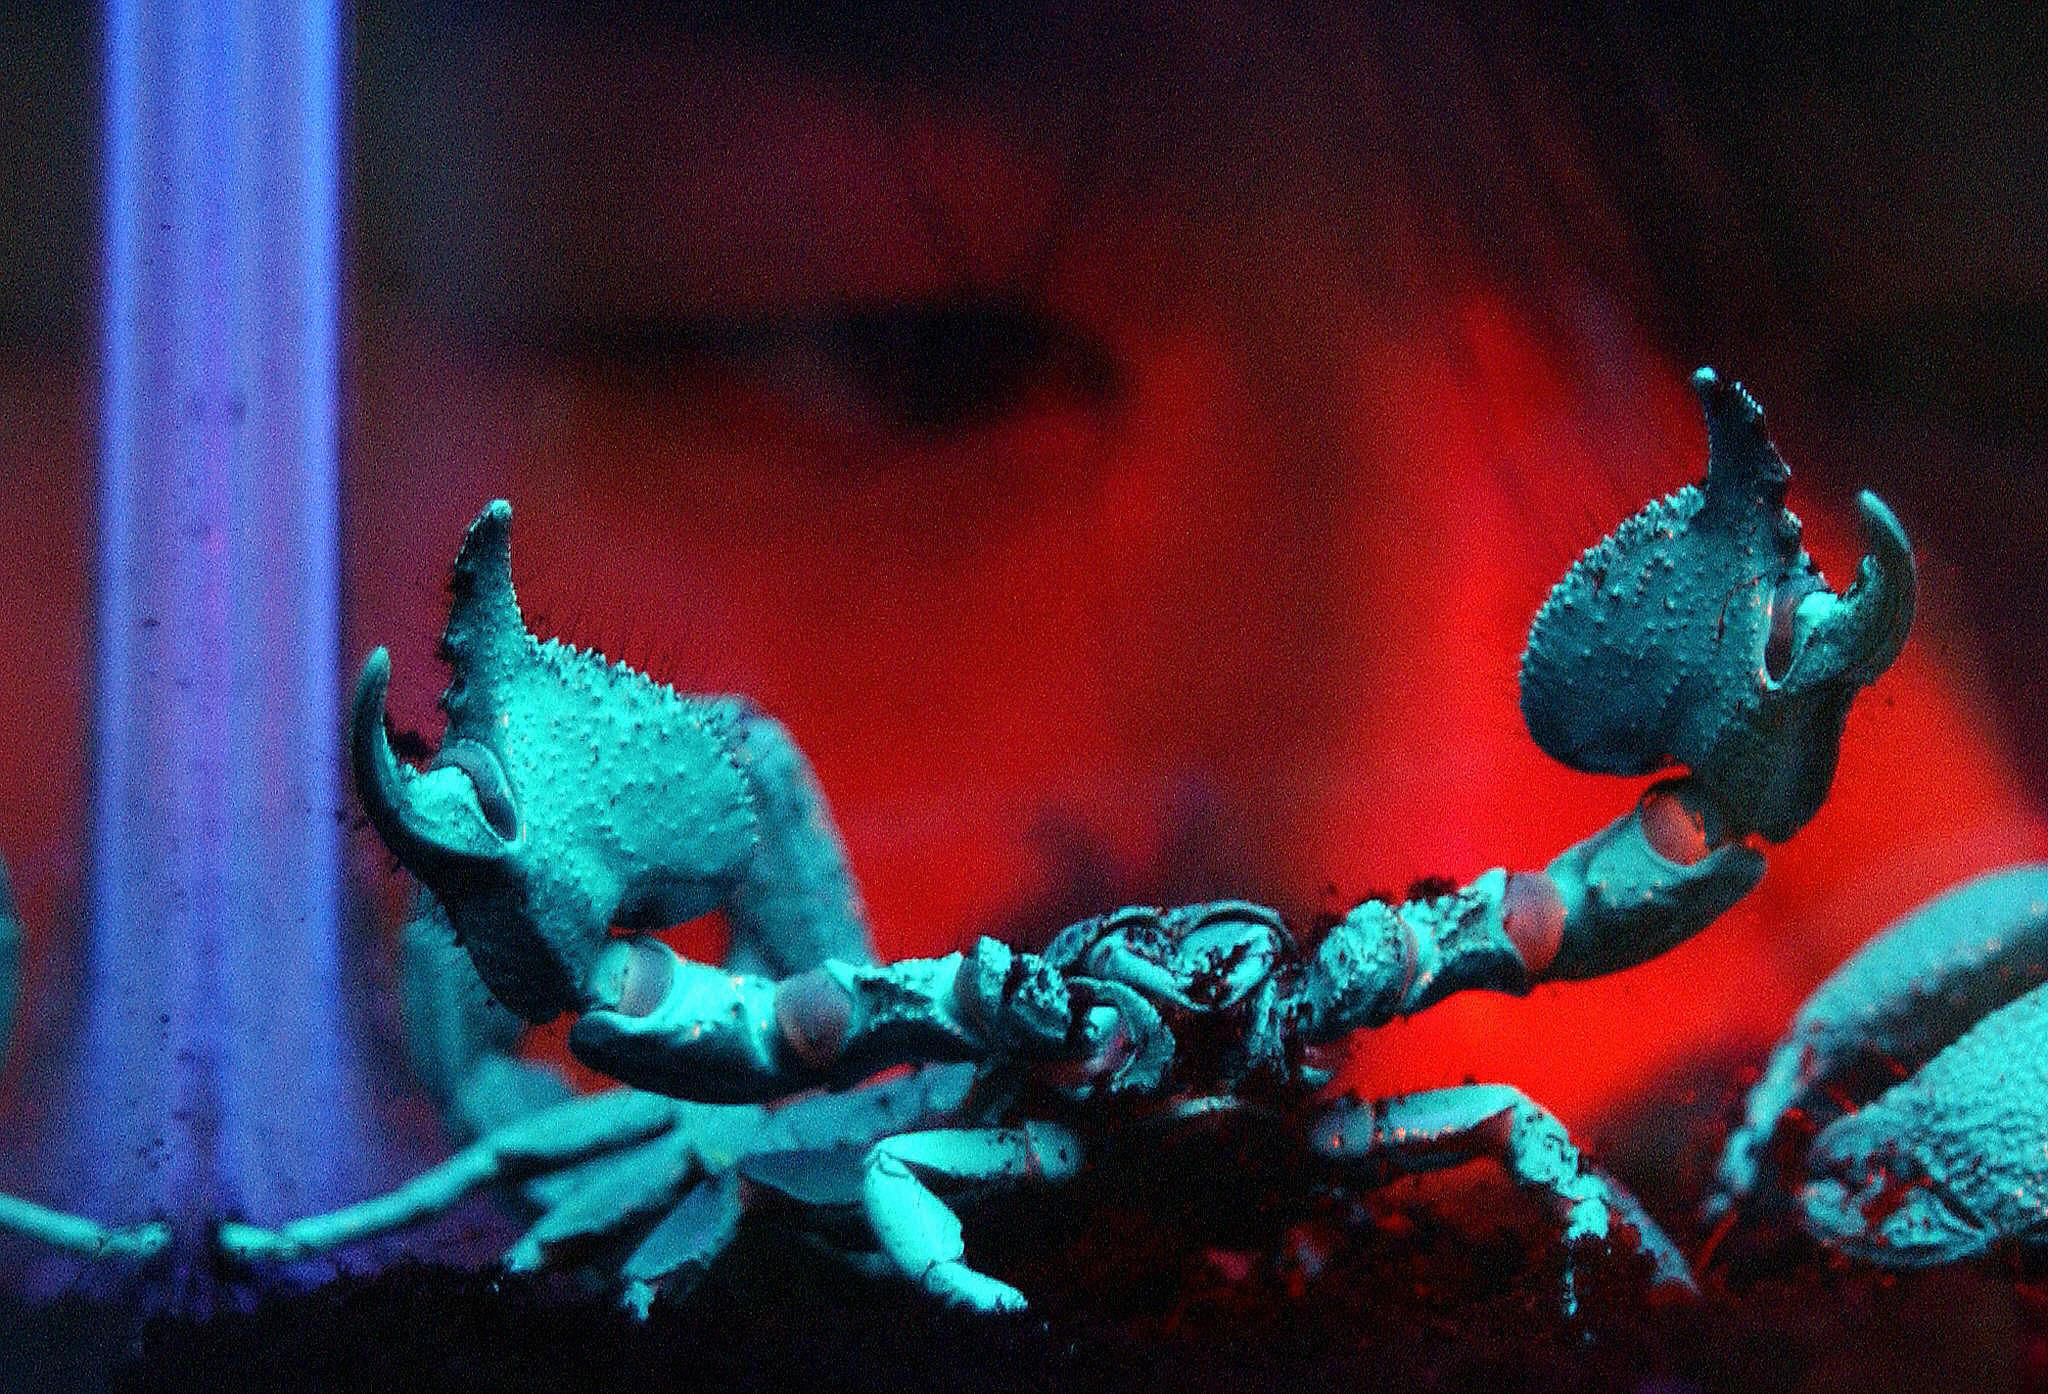 Scorpions fluoresce under ultraviolet light and can handle large doses of radiation. (Photo: SAM YEH/AFP via Getty Images, Getty Images)